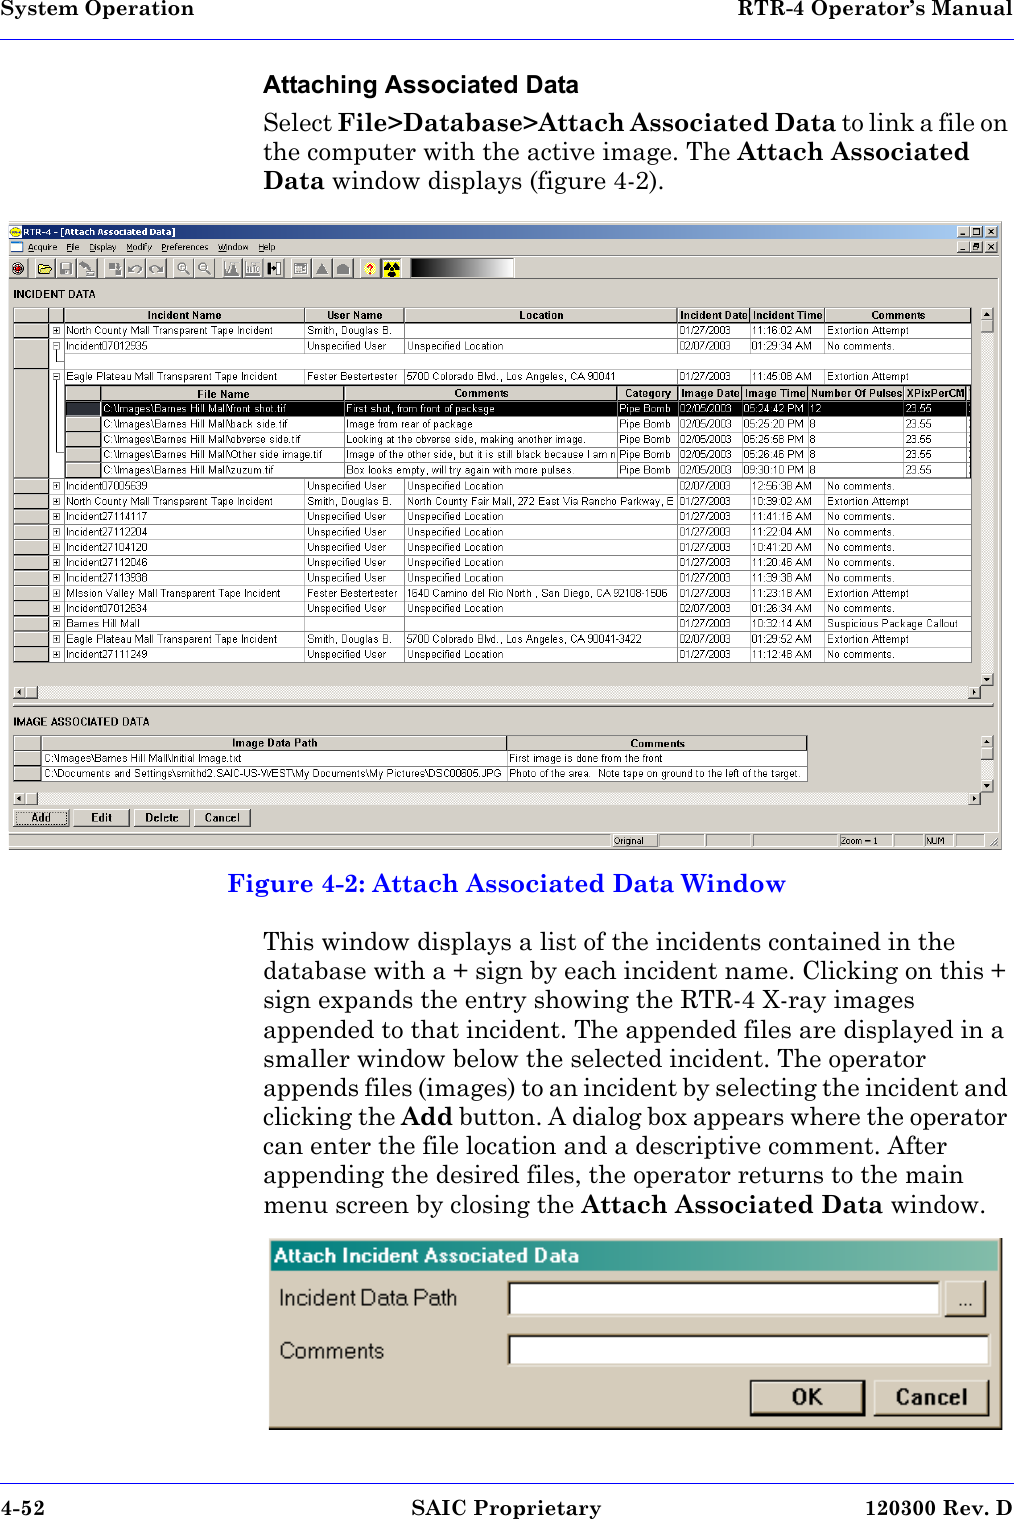 System Operation  RTR-4 Operator’s Manual4-52 SAIC Proprietary 120300 Rev. DAttaching Associated DataSelect File&gt;Database&gt;Attach Associated Data to link a file on the computer with the active image. The Attach Associated Data window displays (figure 4-2). Figure 4-2: Attach Associated Data WindowThis window displays a list of the incidents contained in the database with a + sign by each incident name. Clicking on this + sign expands the entry showing the RTR-4 X-ray images appended to that incident. The appended files are displayed in a smaller window below the selected incident. The operator appends files (images) to an incident by selecting the incident and clicking the Add button. A dialog box appears where the operator can enter the file location and a descriptive comment. After appending the desired files, the operator returns to the main menu screen by closing the Attach Associated Data window. RTR04attImg